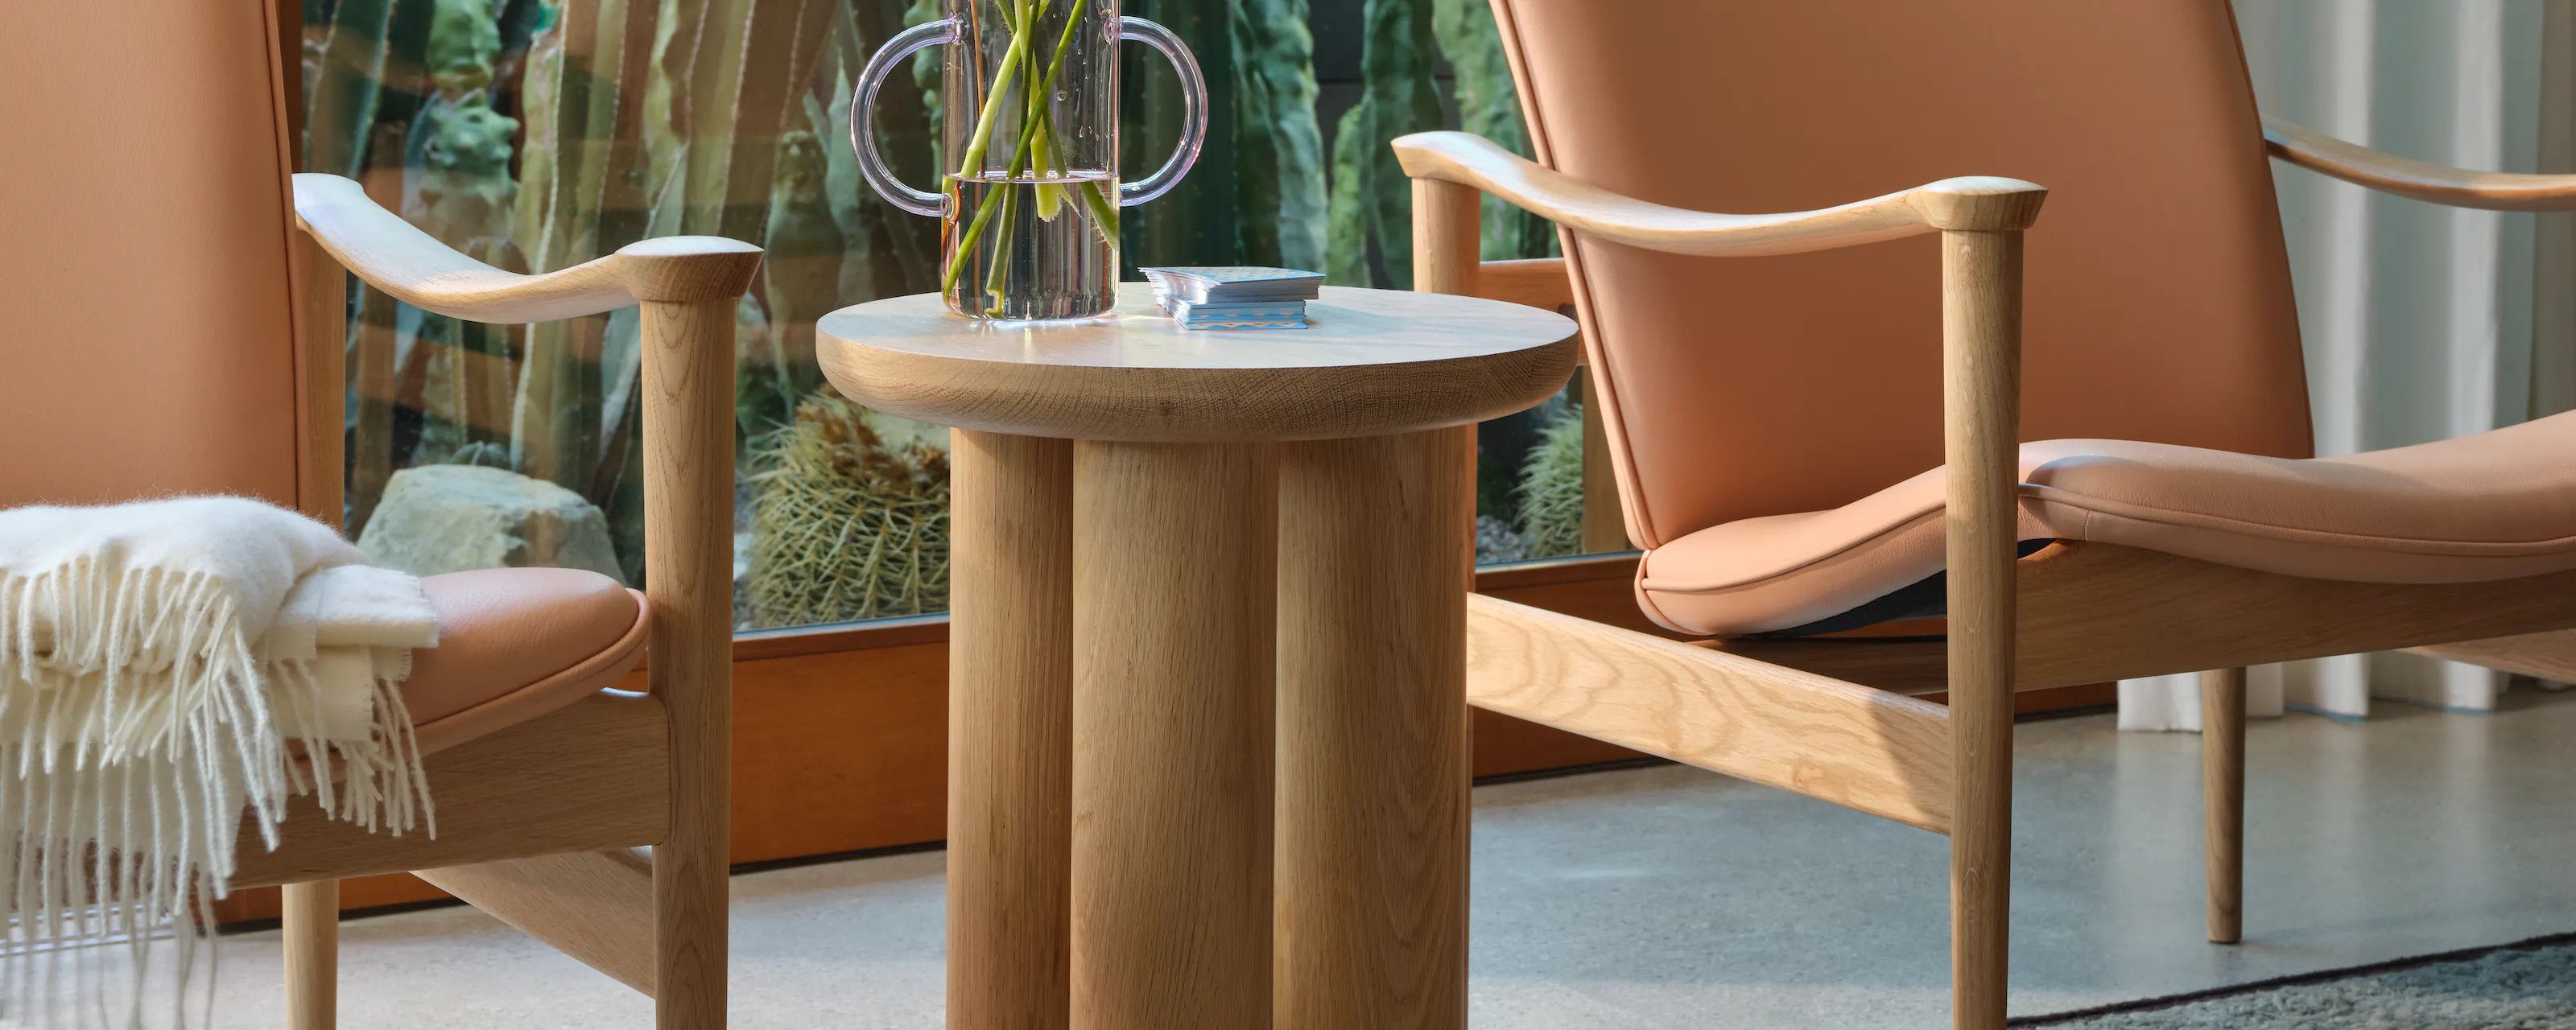 Antropologia Side Table | Design Within Reach